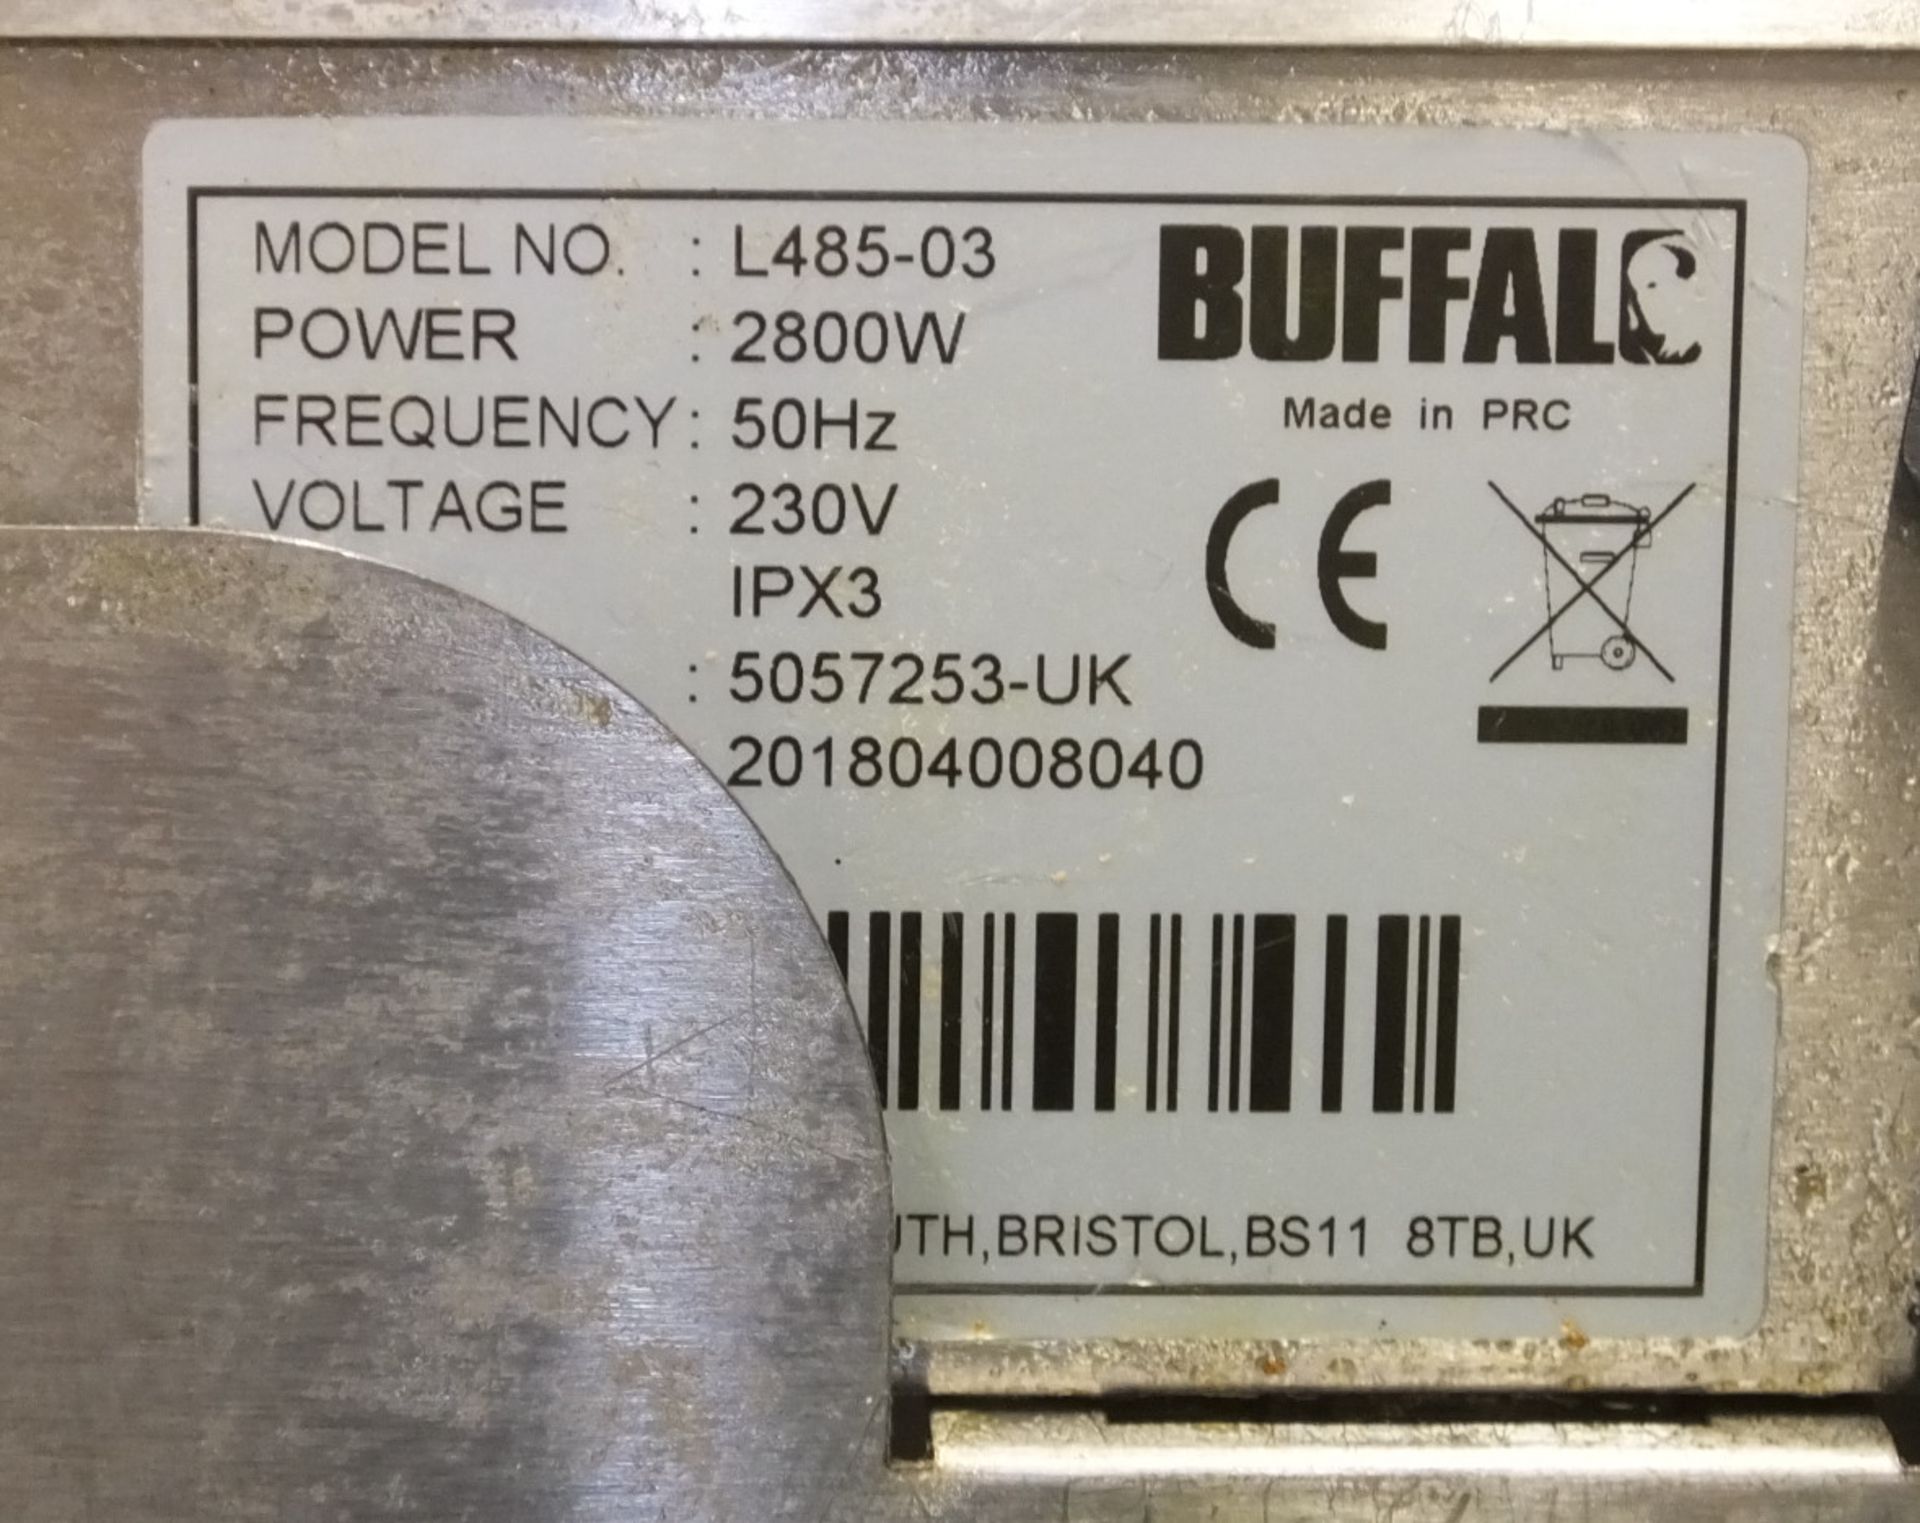 Buffalo L485-03 Double Electric Fryer on Stainless Steel Unit - L850 x D600 x H630mm (dime - Image 8 of 8